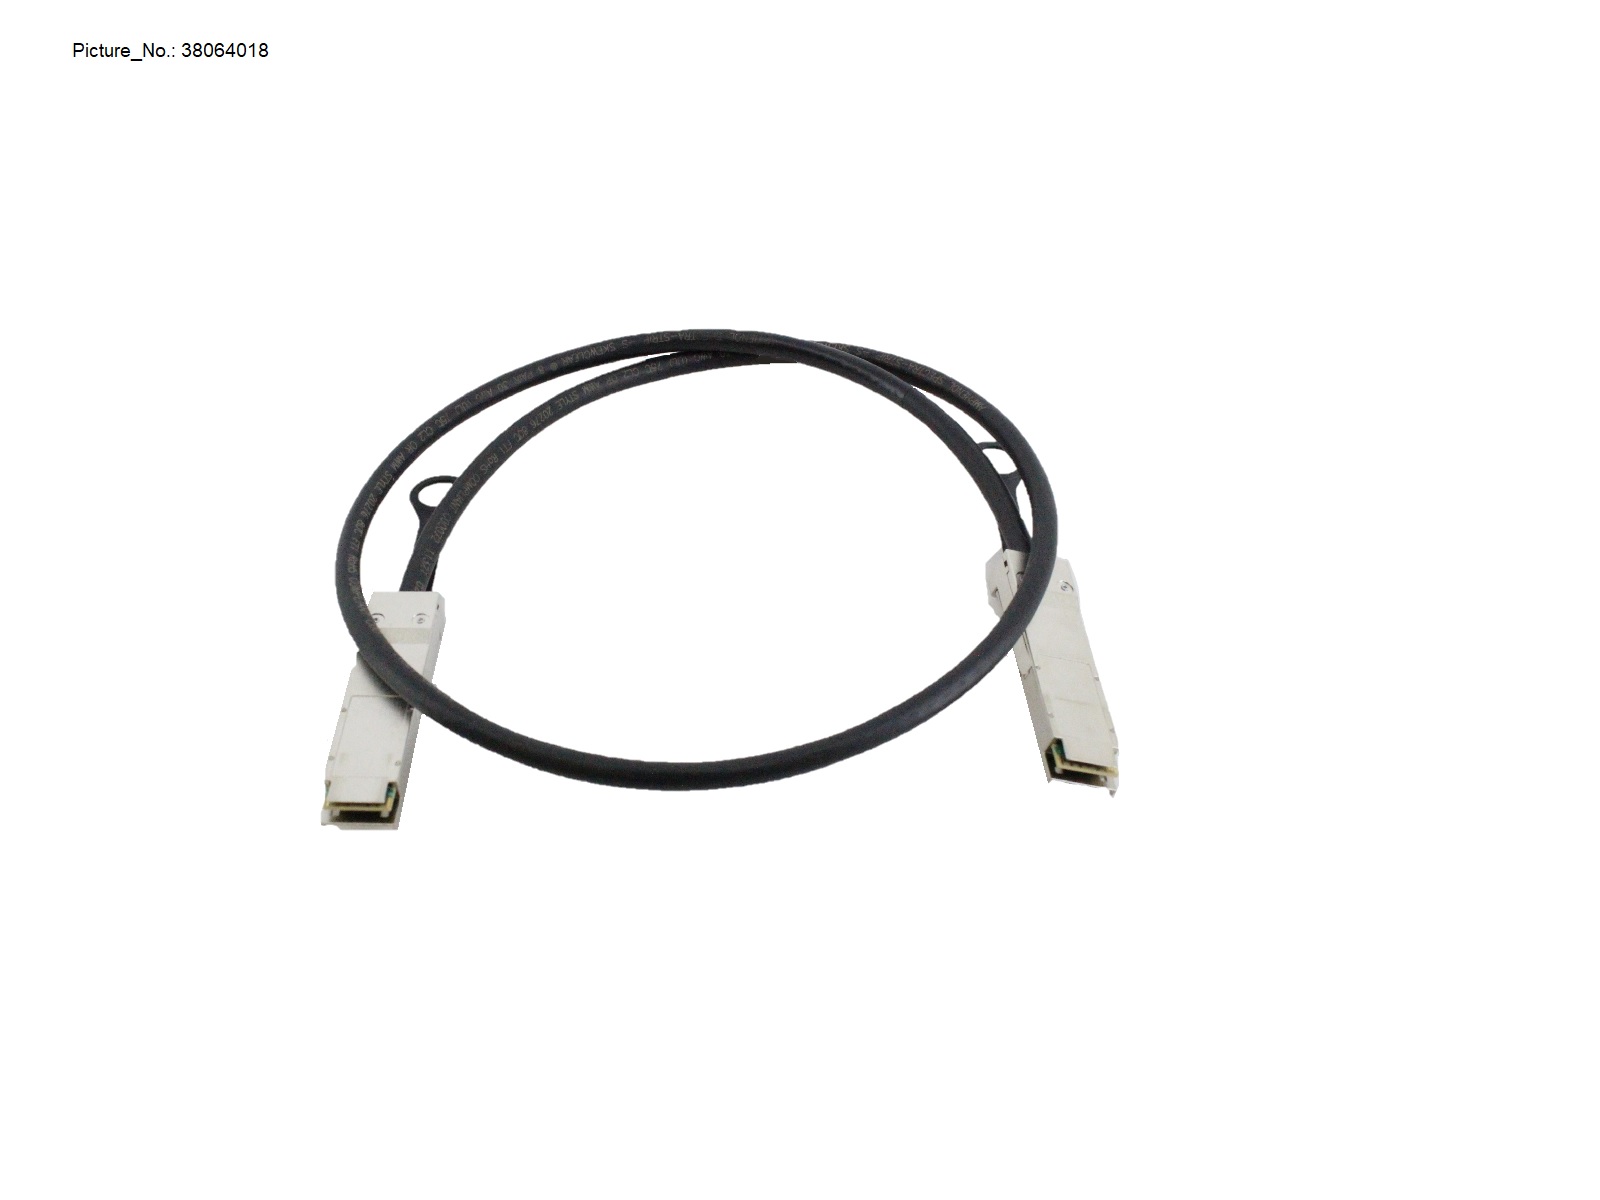 40GBE QSFP CABLE 1M (STACKING)